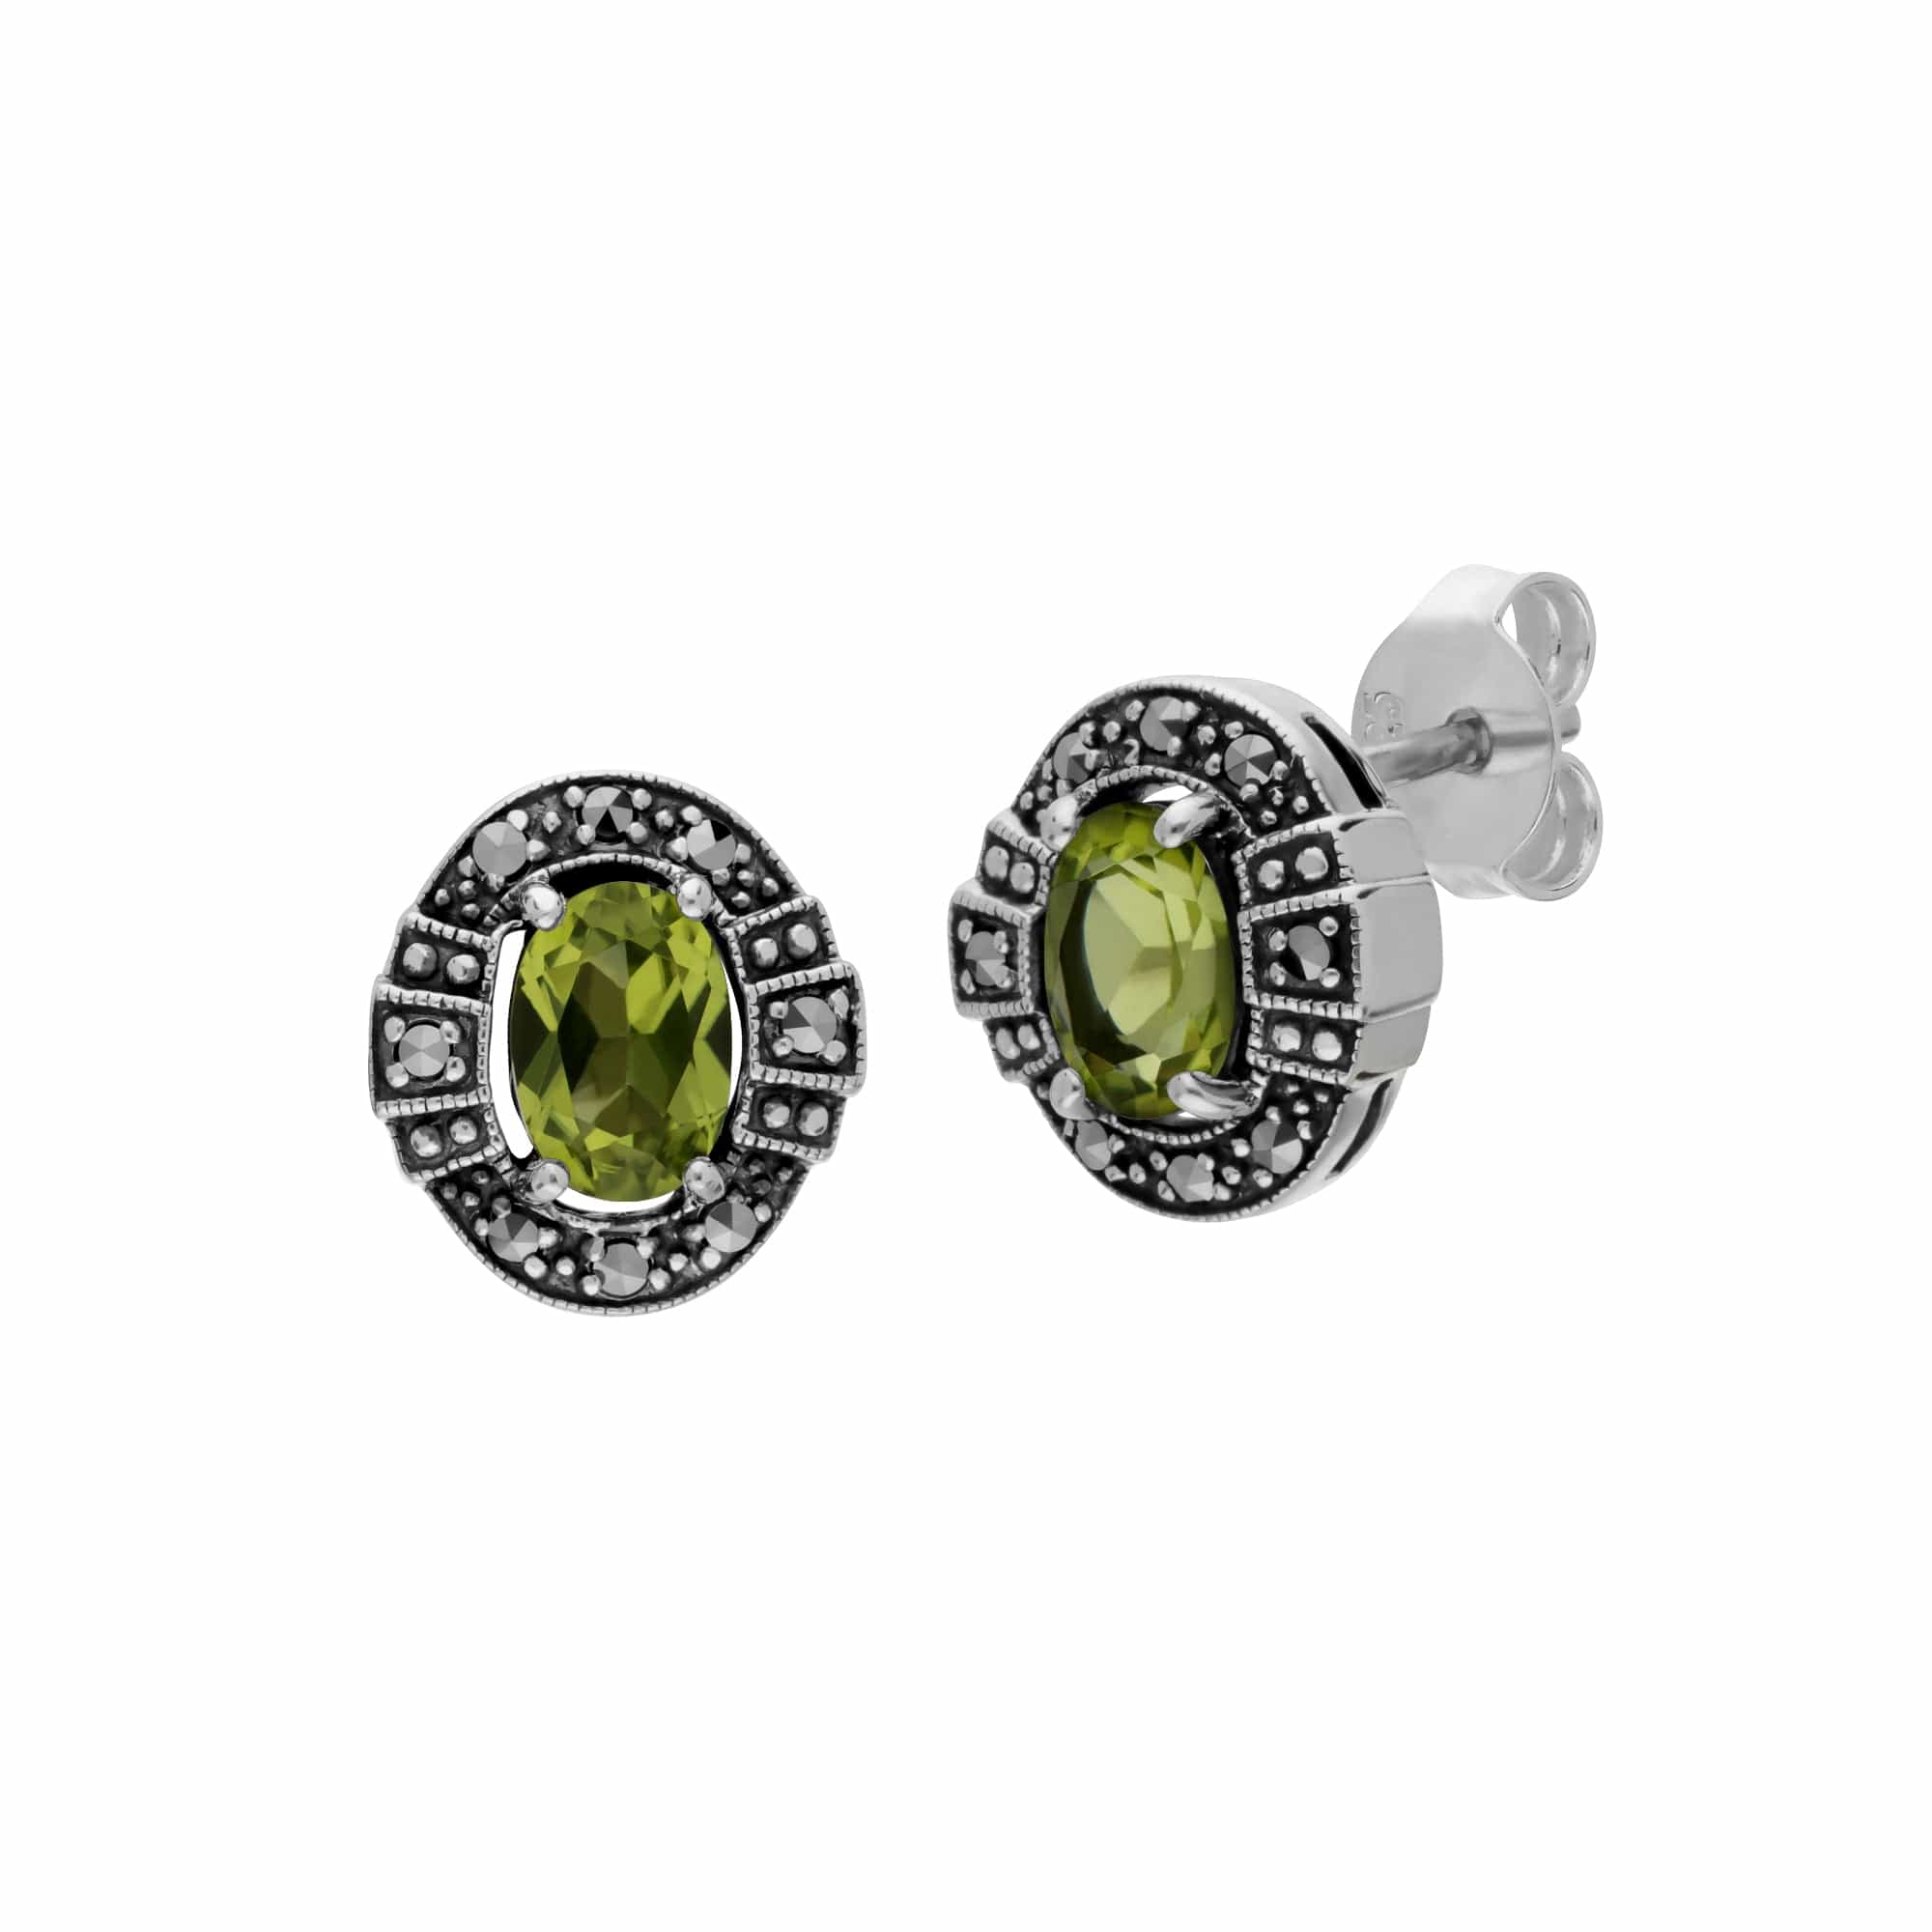 214E873004925-214R605704925 Art Deco Style Oval Peridot and Marcasite Cluster Stud Earrings & Ring Set 2